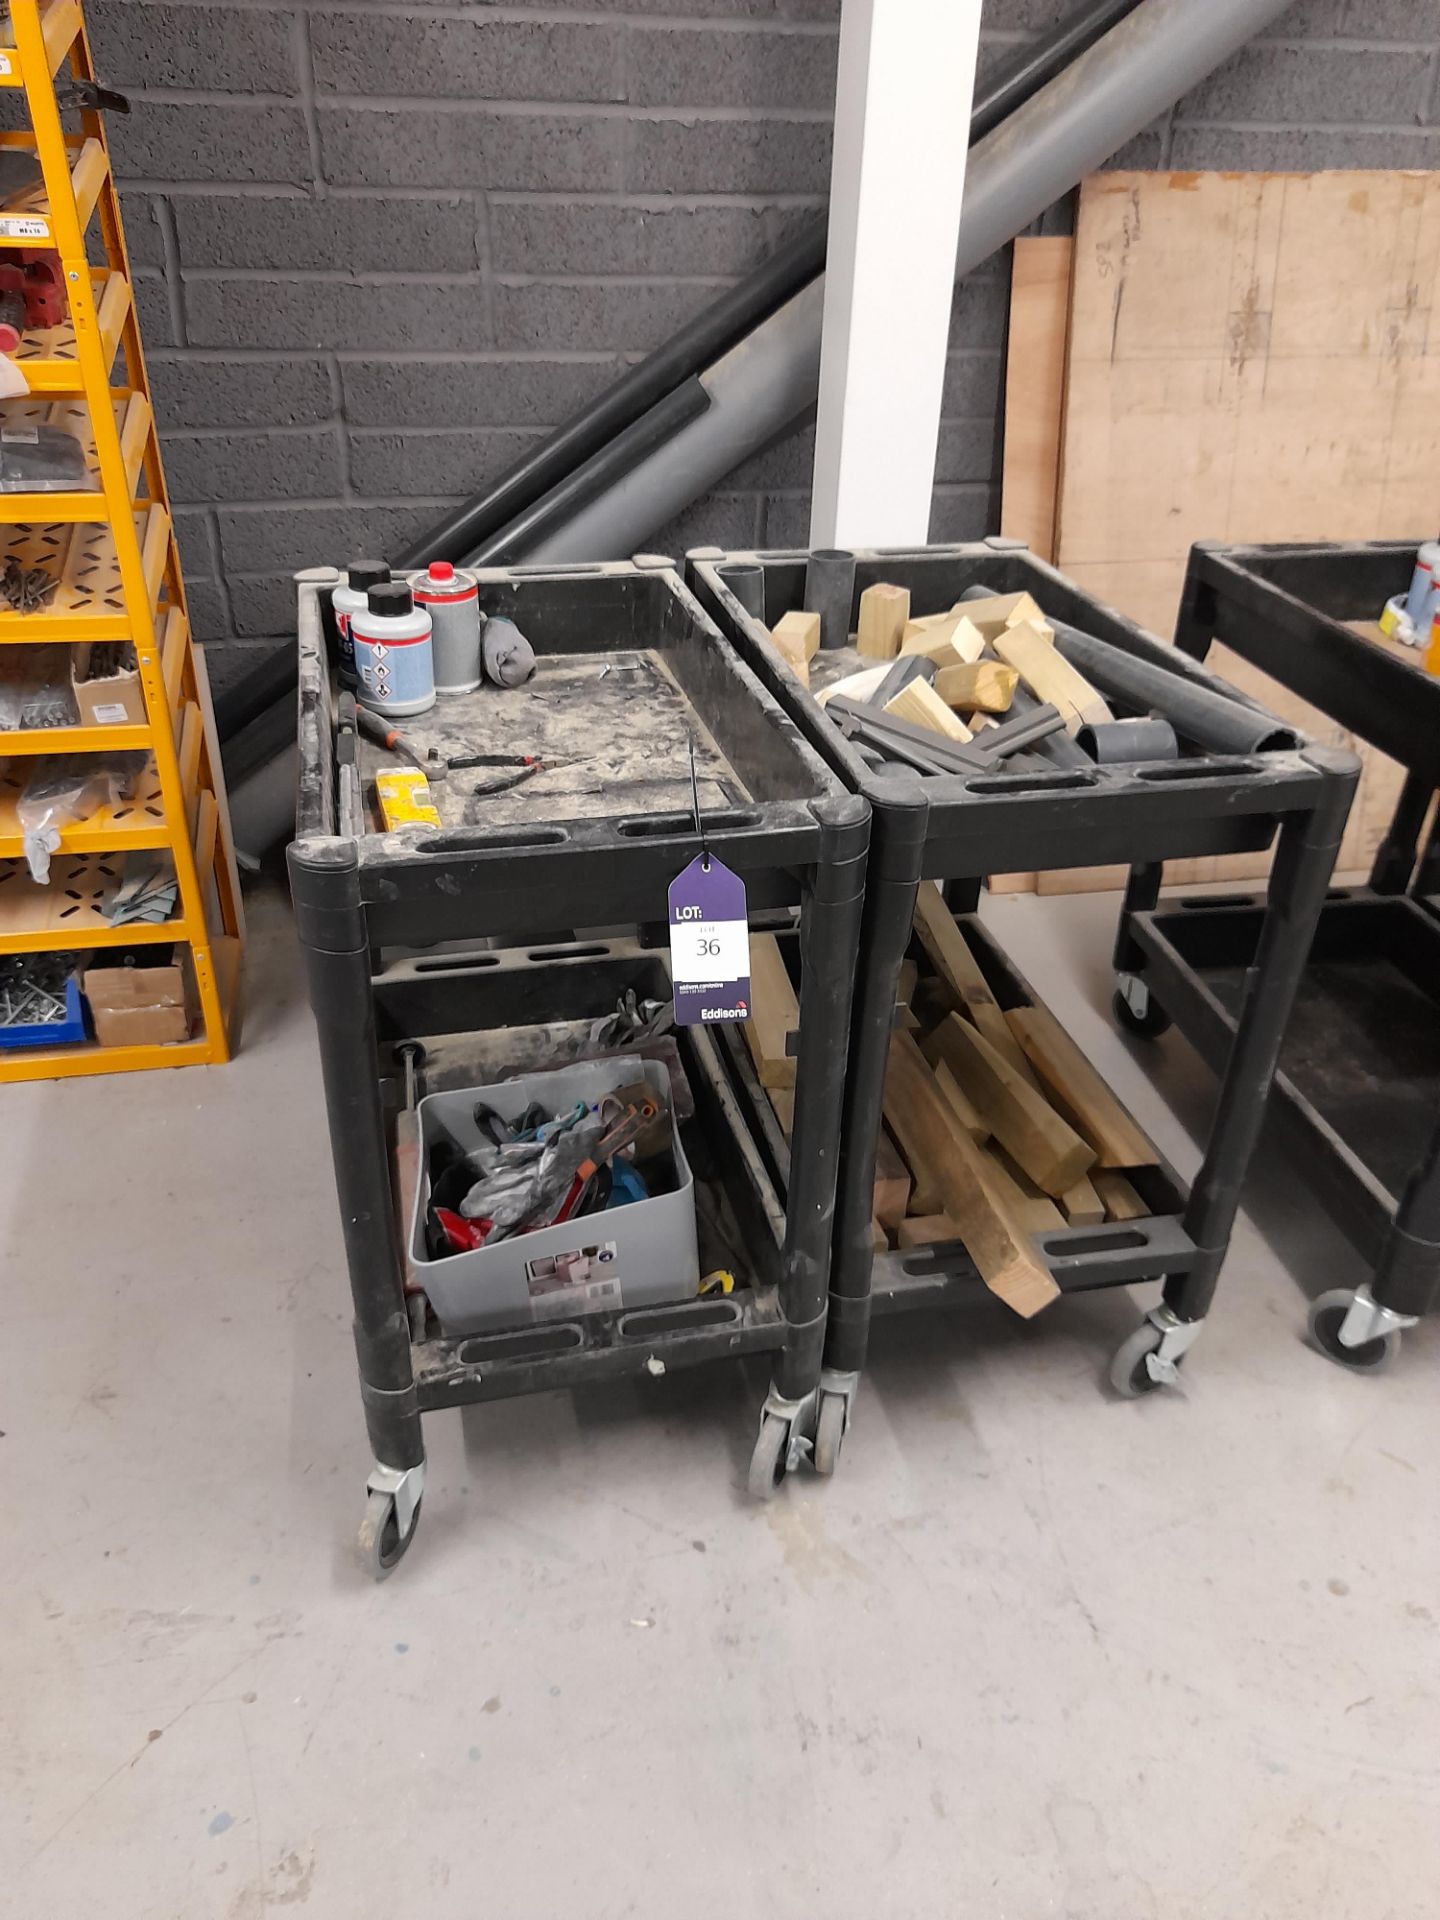 2 x Plastic trolleys, with contents